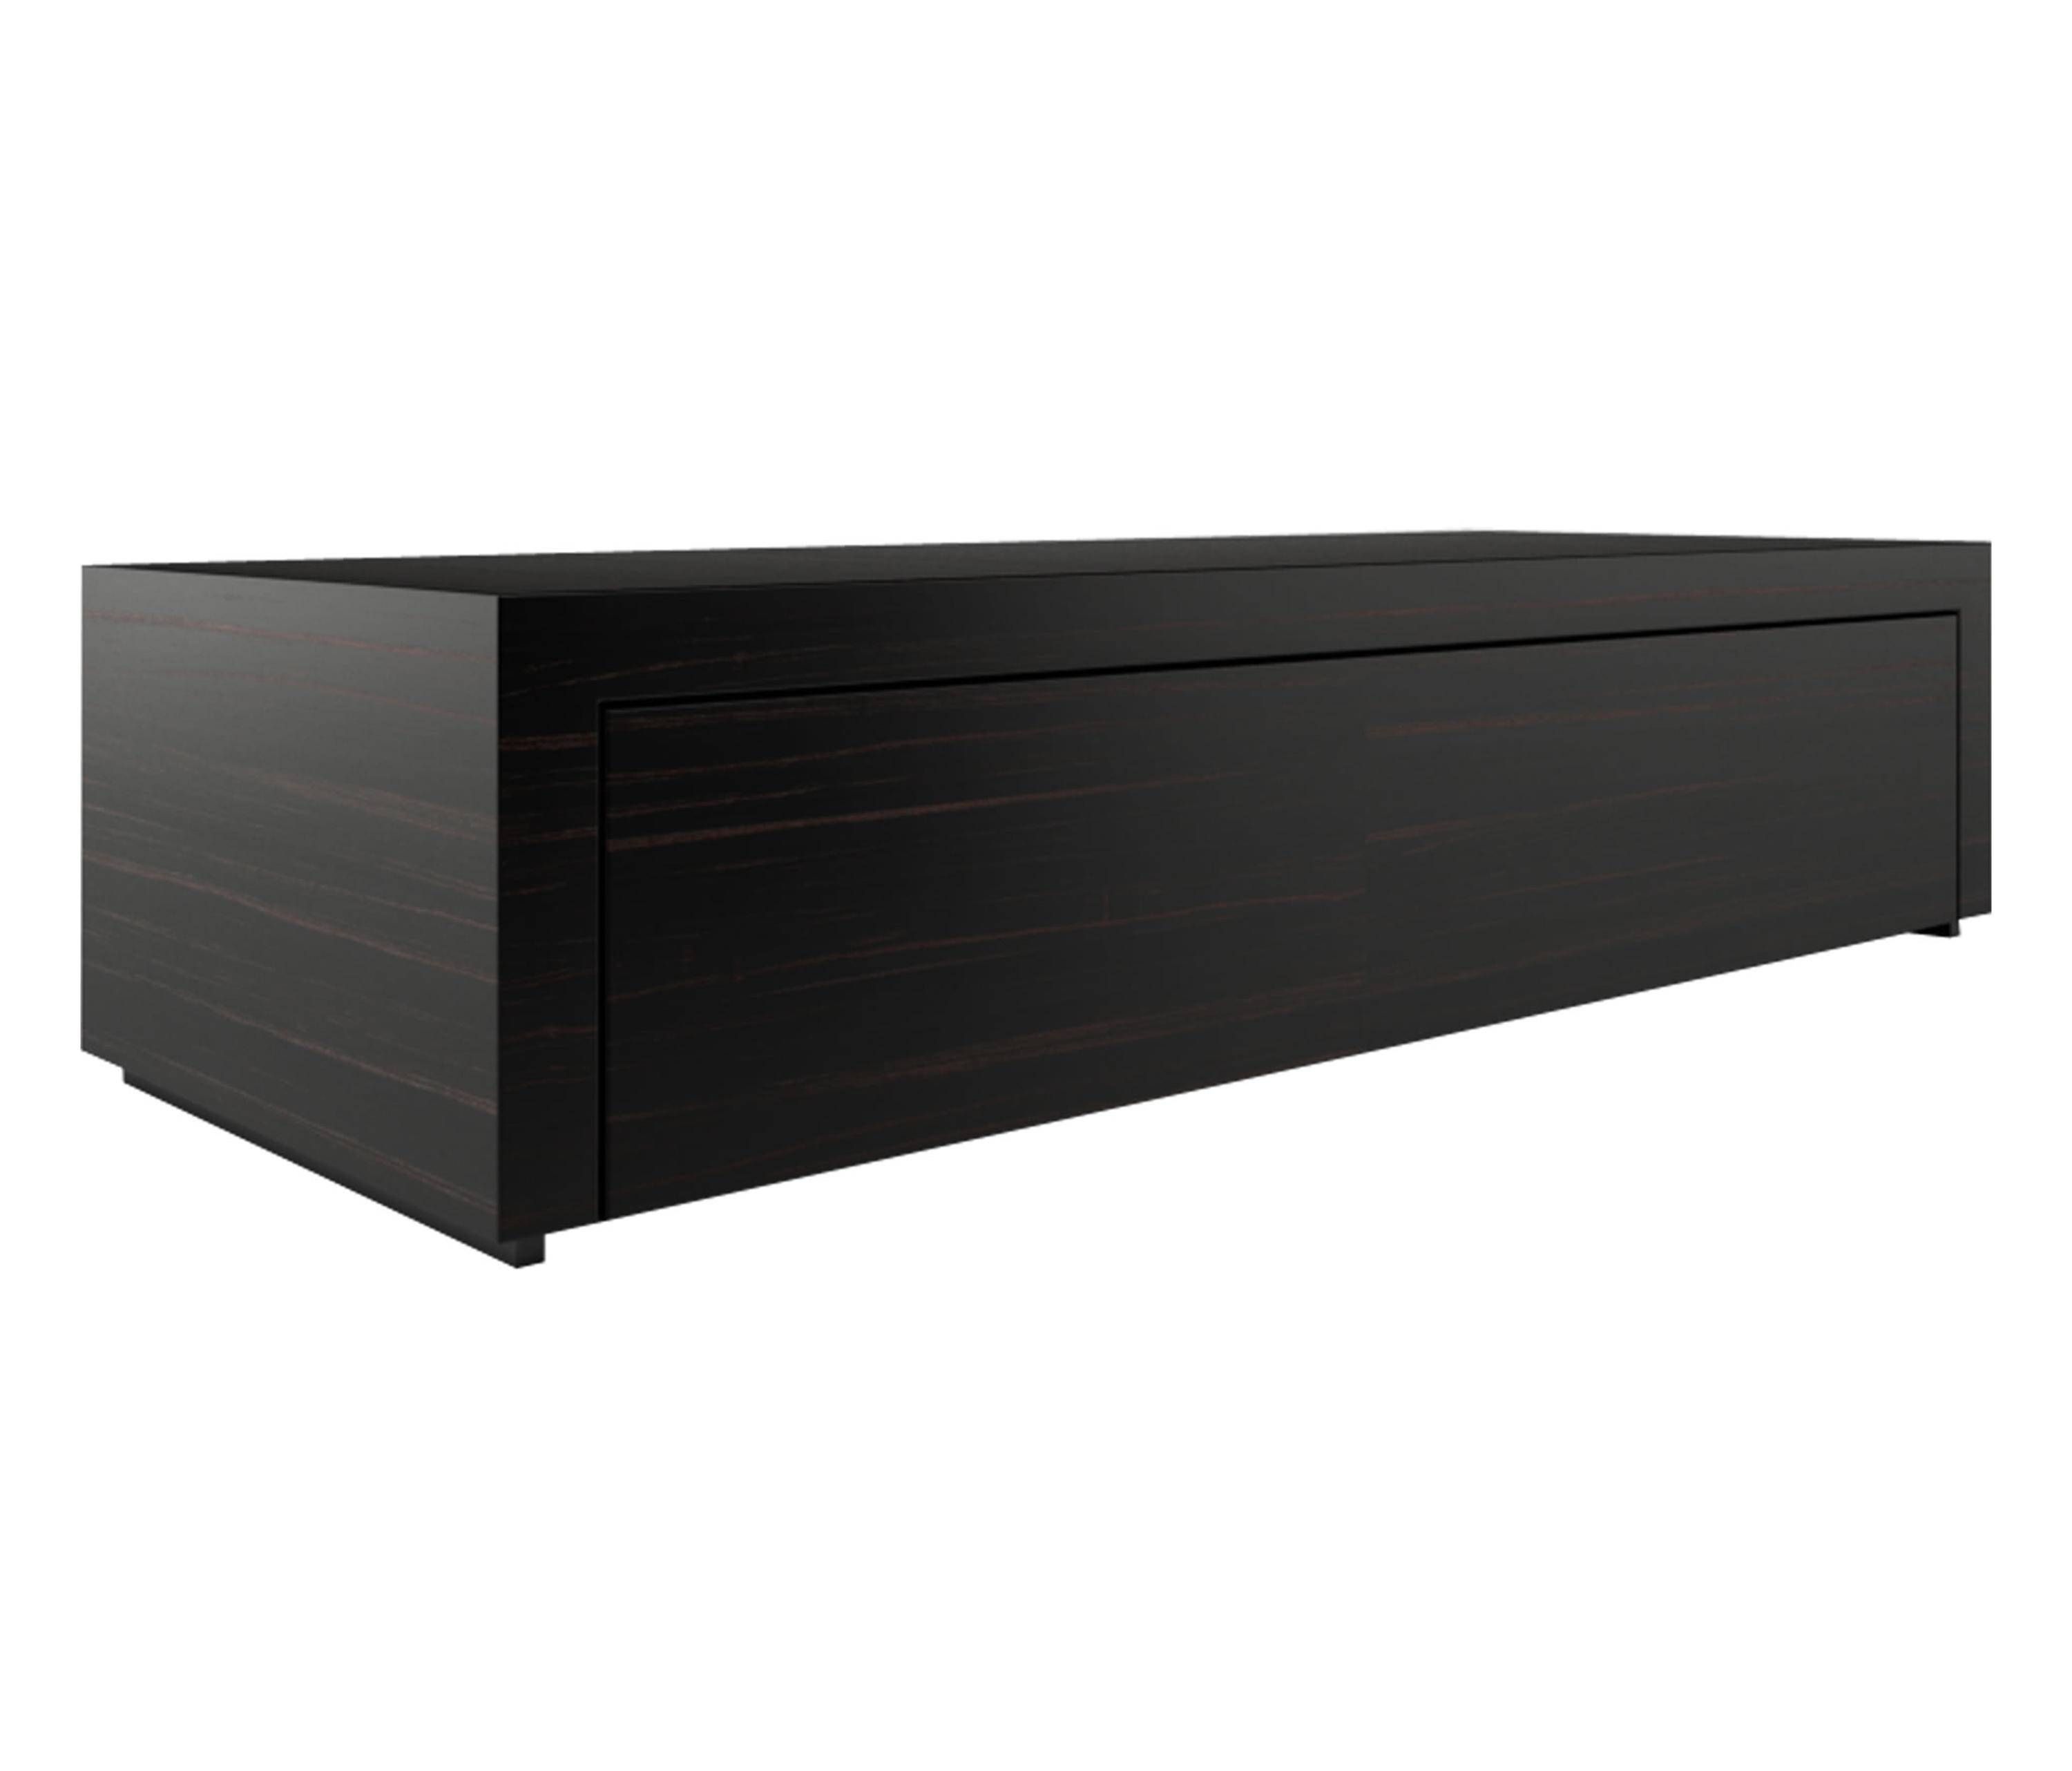 Repositio Tv/ Hifi Sideboard – Sideboards From Rechteck | Architonic In Sideboards Tv (View 23 of 30)